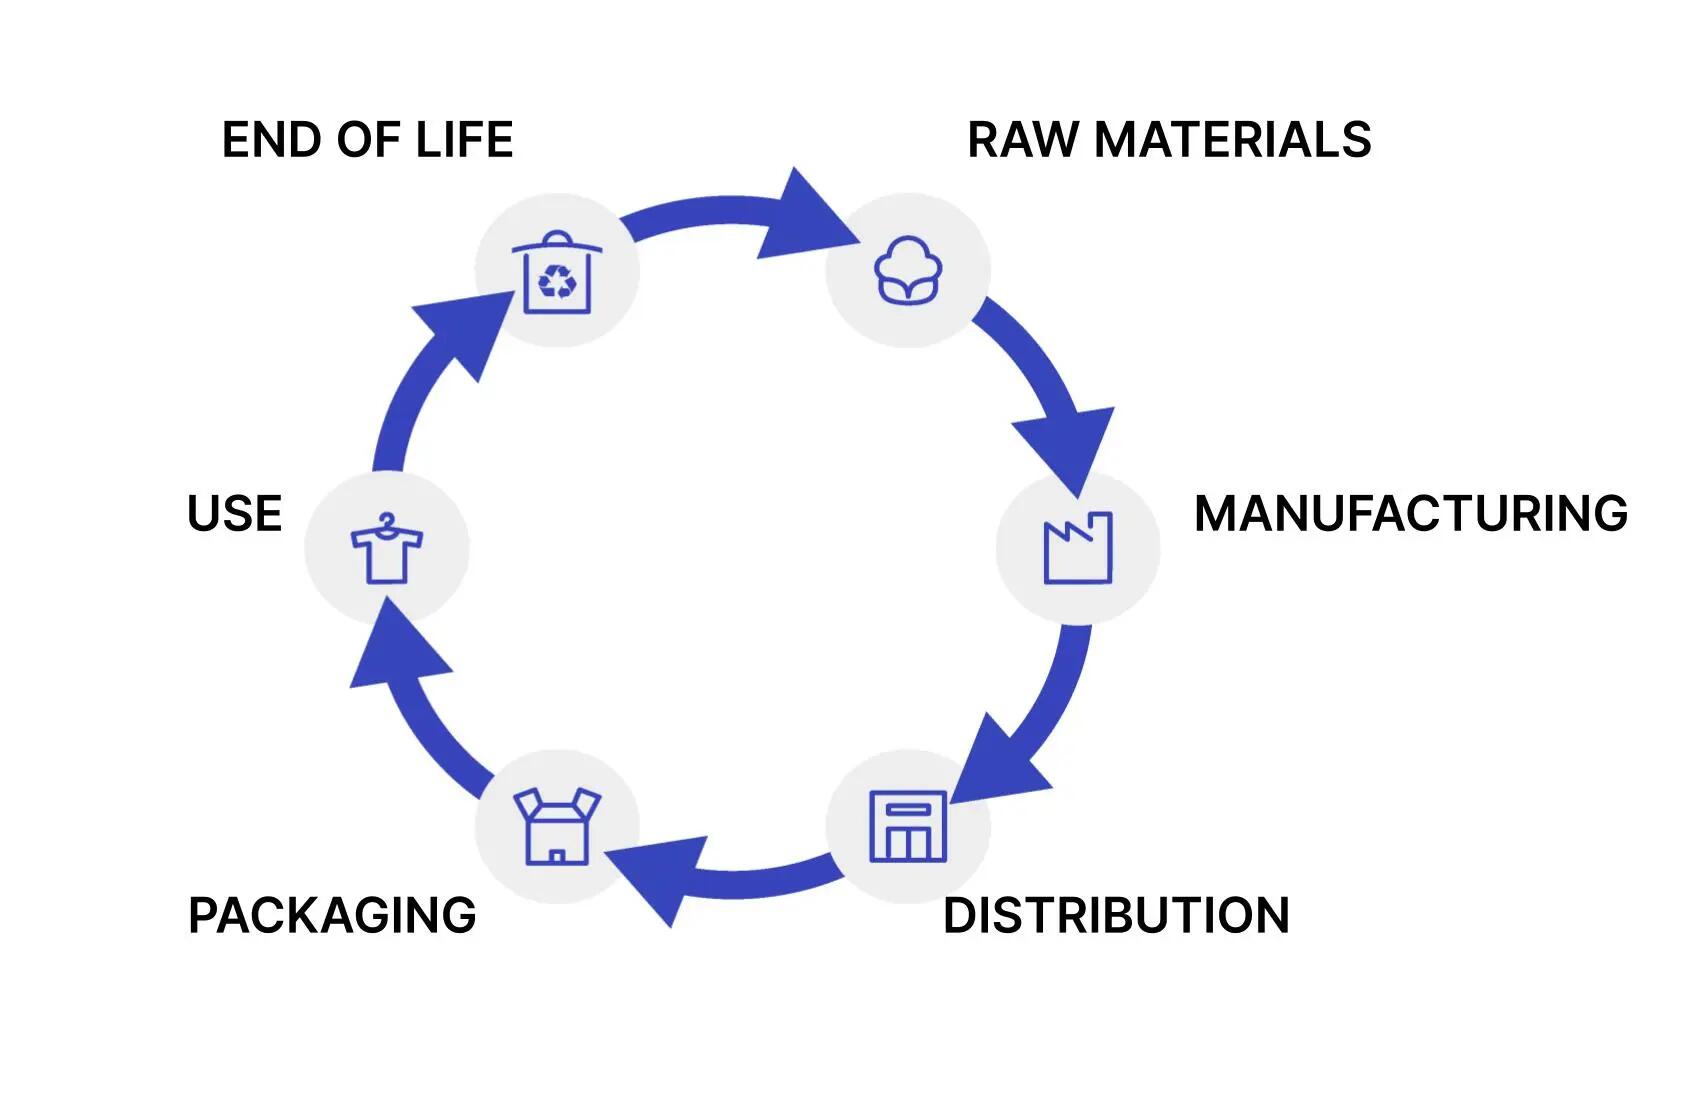 The life of our products